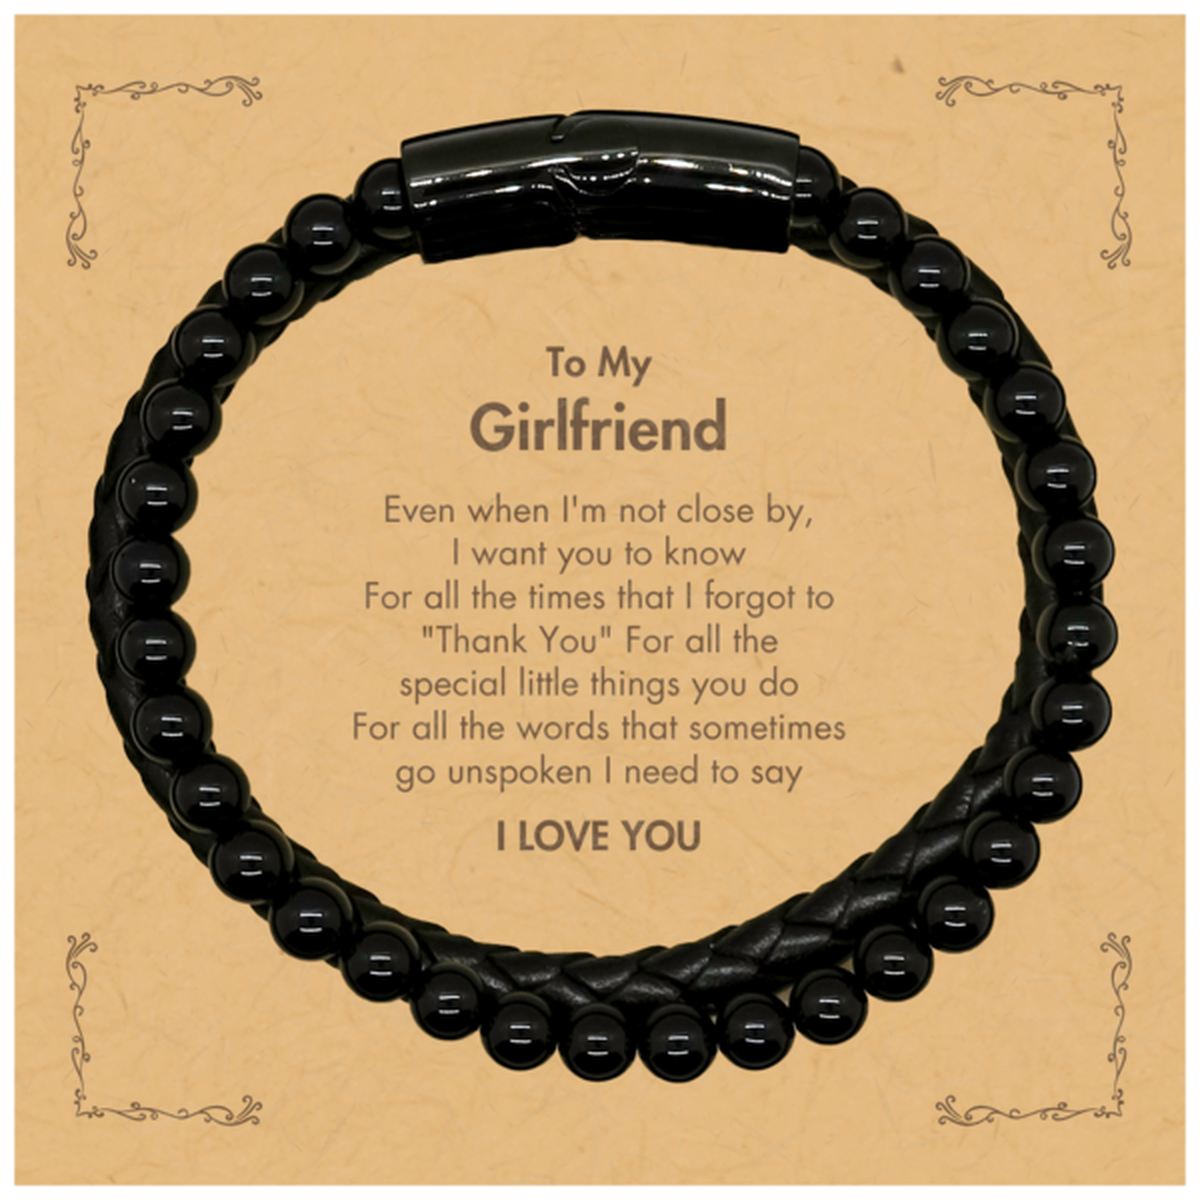 Thank You Gifts for Girlfriend, Keepsake Stone Leather Bracelets Gifts for Girlfriend Birthday Mother's day Father's Day Girlfriend For all the words That sometimes go unspoken I need to say I LOVE YOU